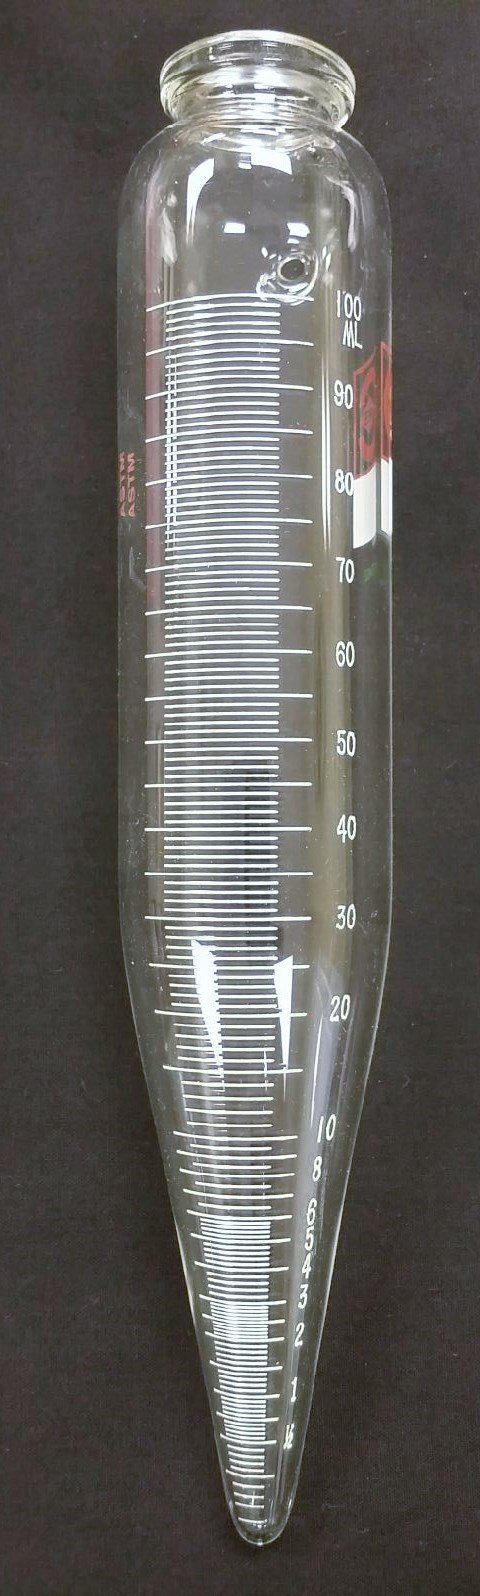 27350-000 Weathering Tube with Vent Hole, 100ml